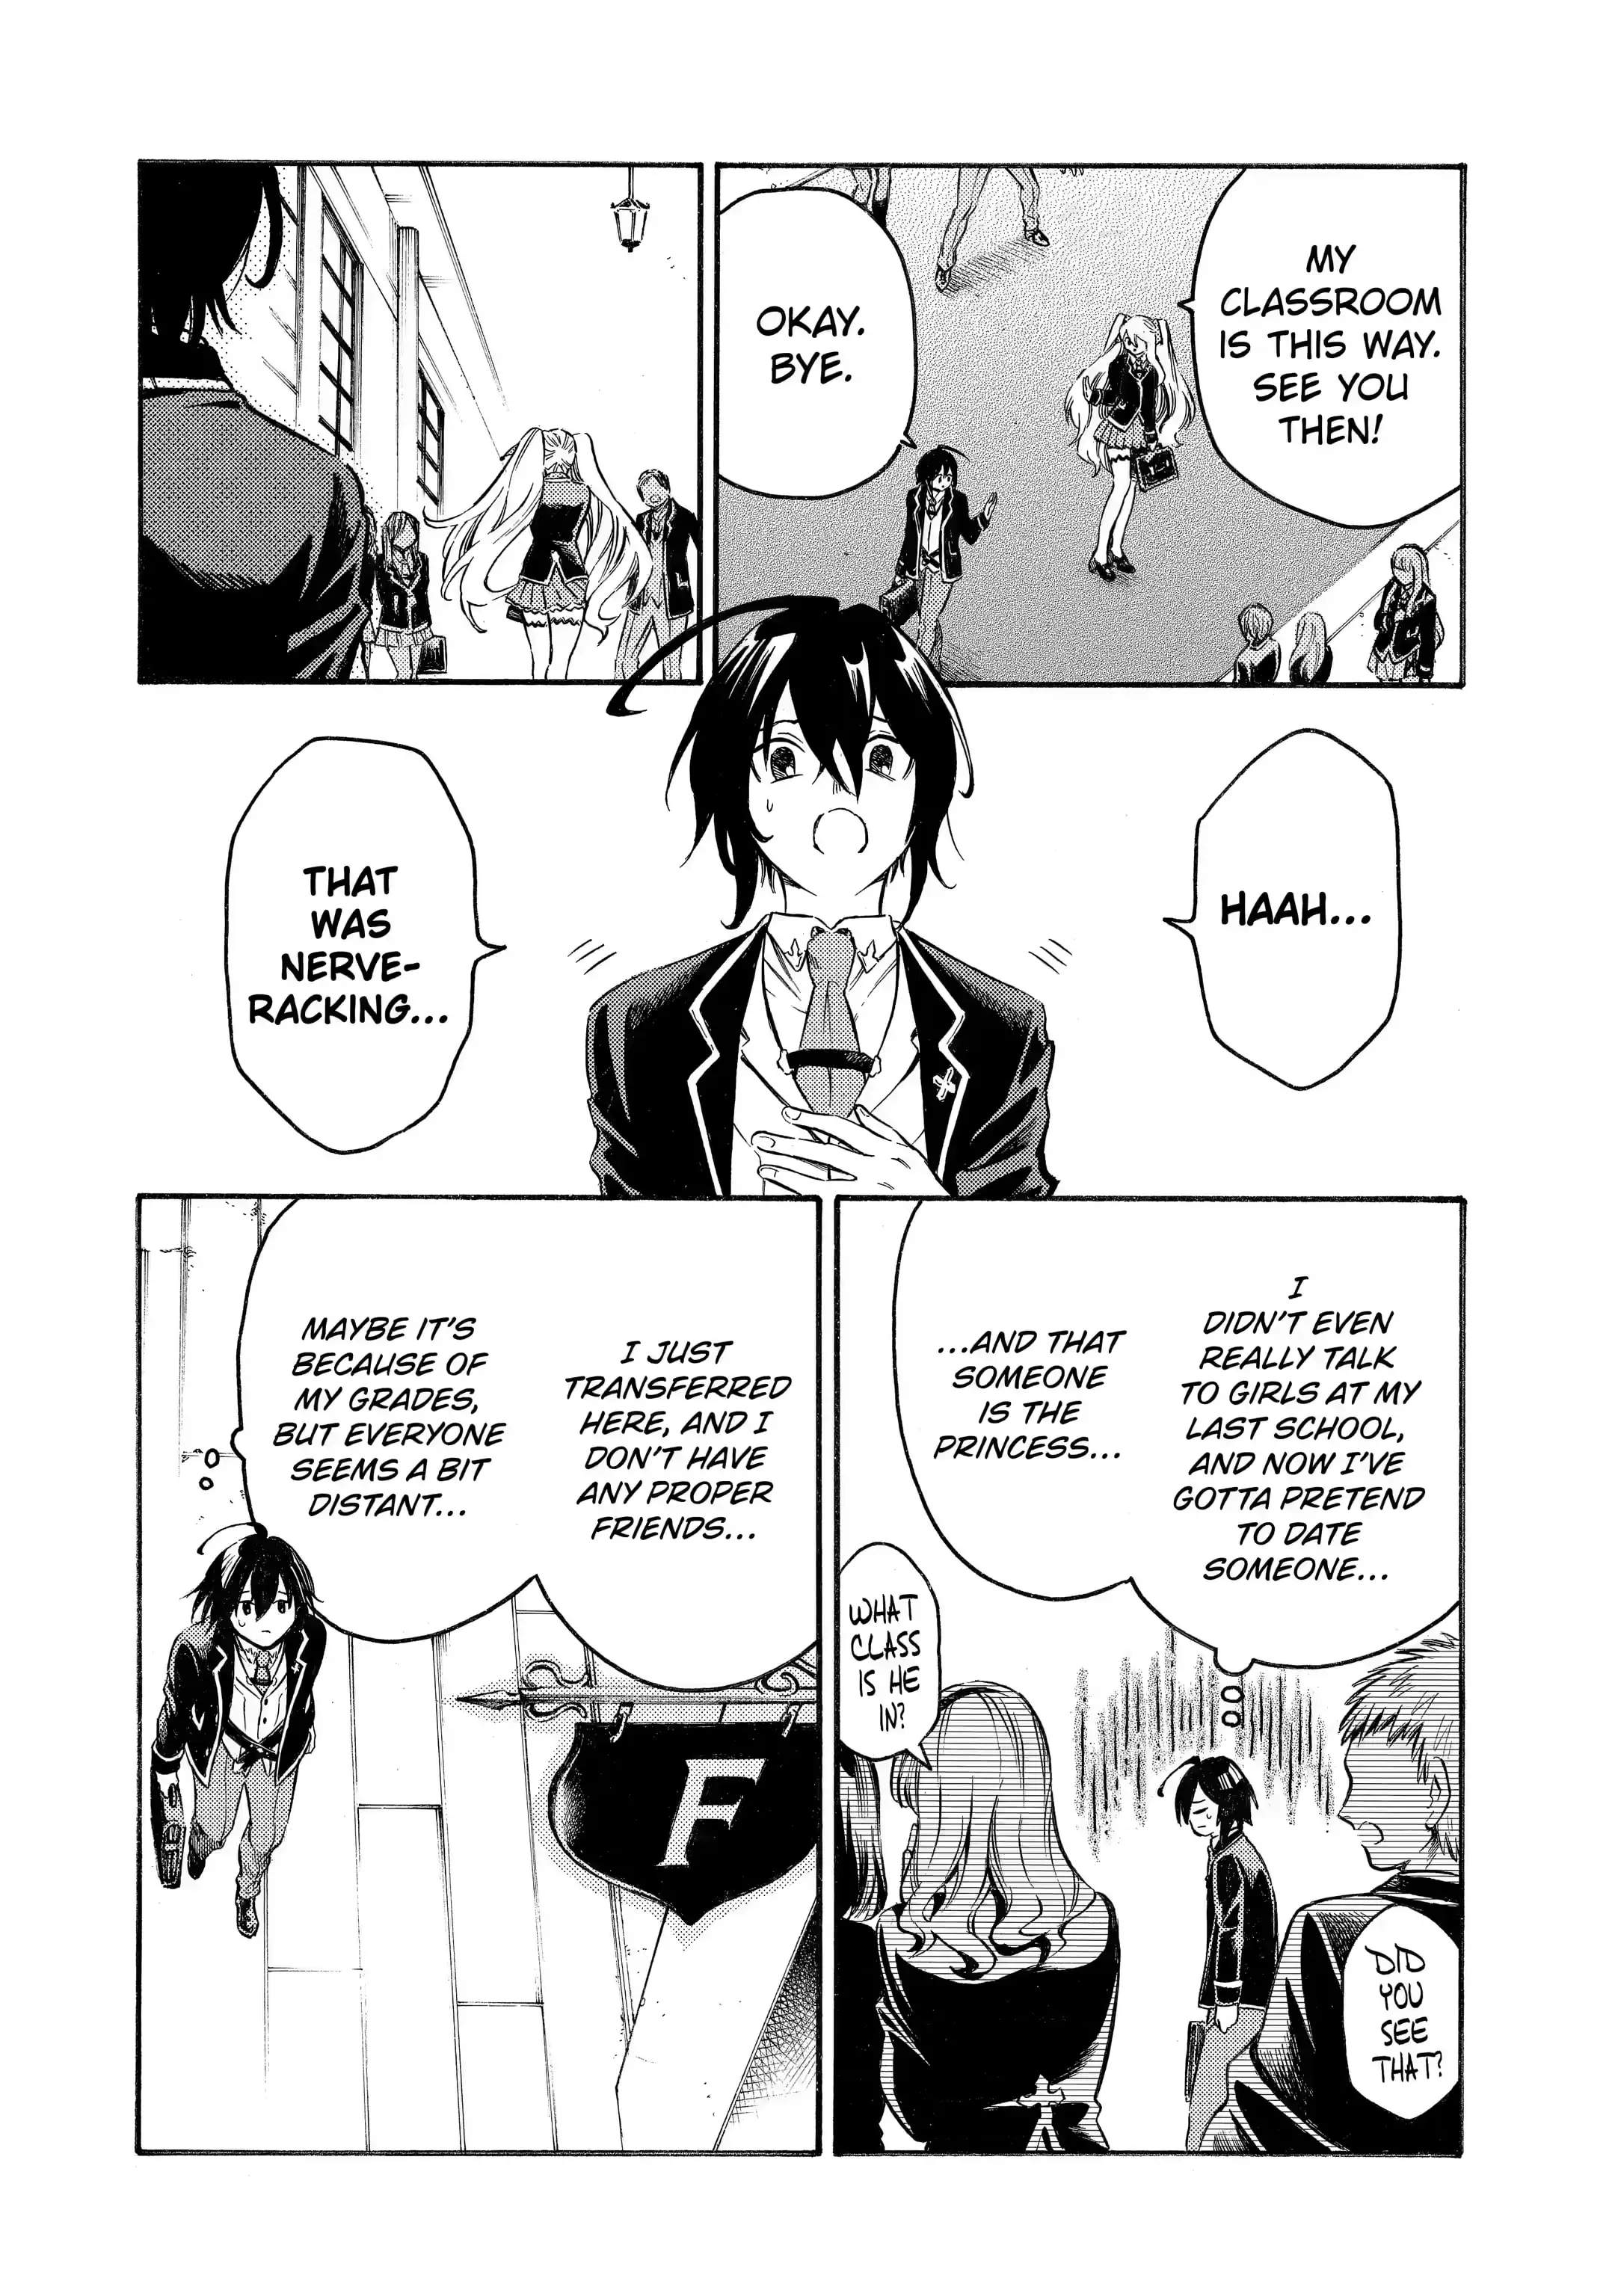 Reincarnation of the Unrivalled Time Mage: The Underachiever at the Magic Academy Turns Out to Be the Strongest Mage Who Controls Time! Chapter 3.1-eng-li - Page 7